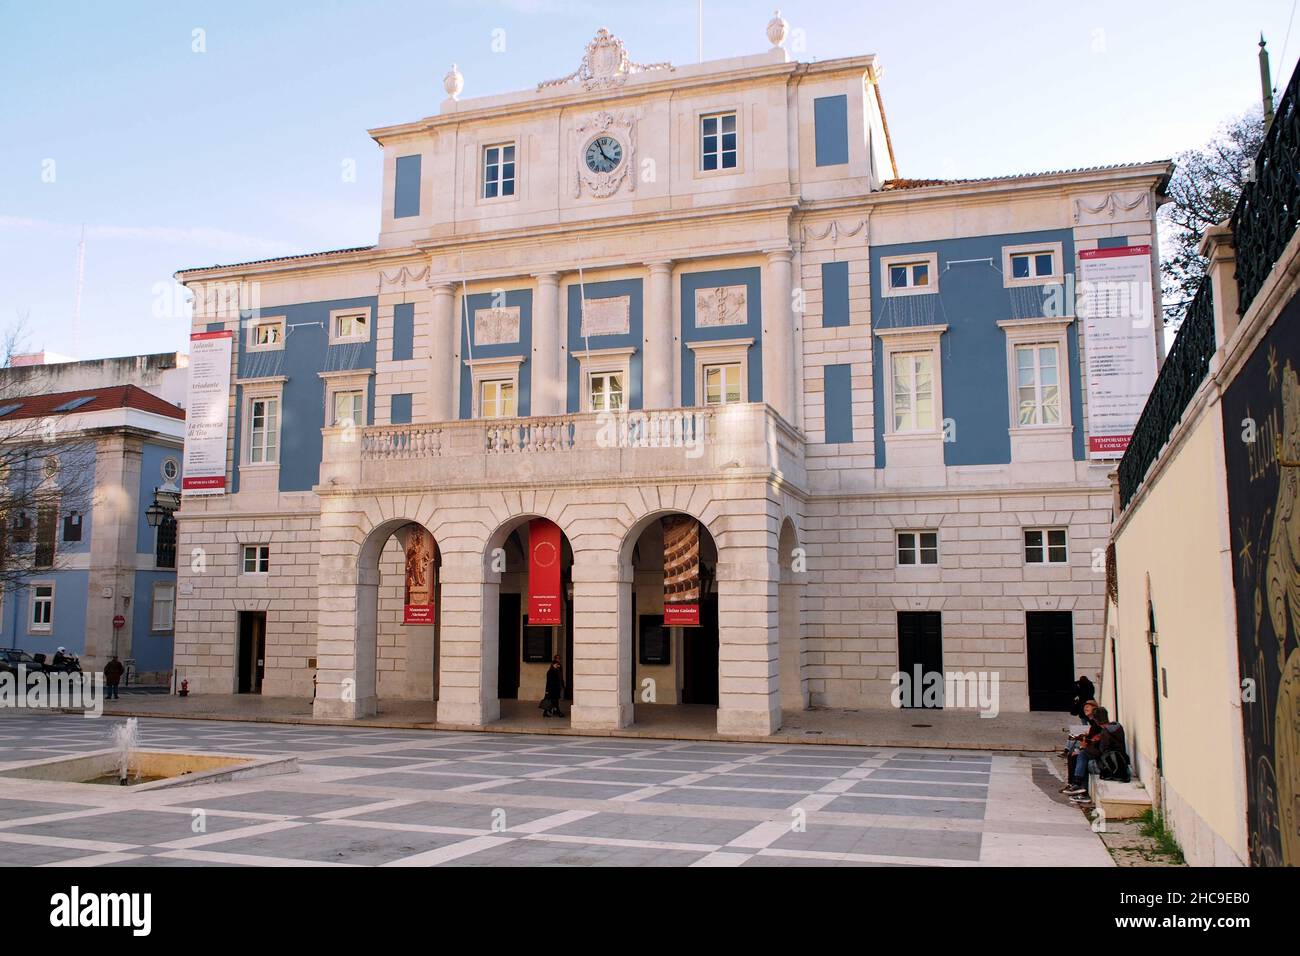 National Theatre of Sao Carlos, 18th-century opera house with neoclassical facade, Lisbon, Portugal Stock Photo